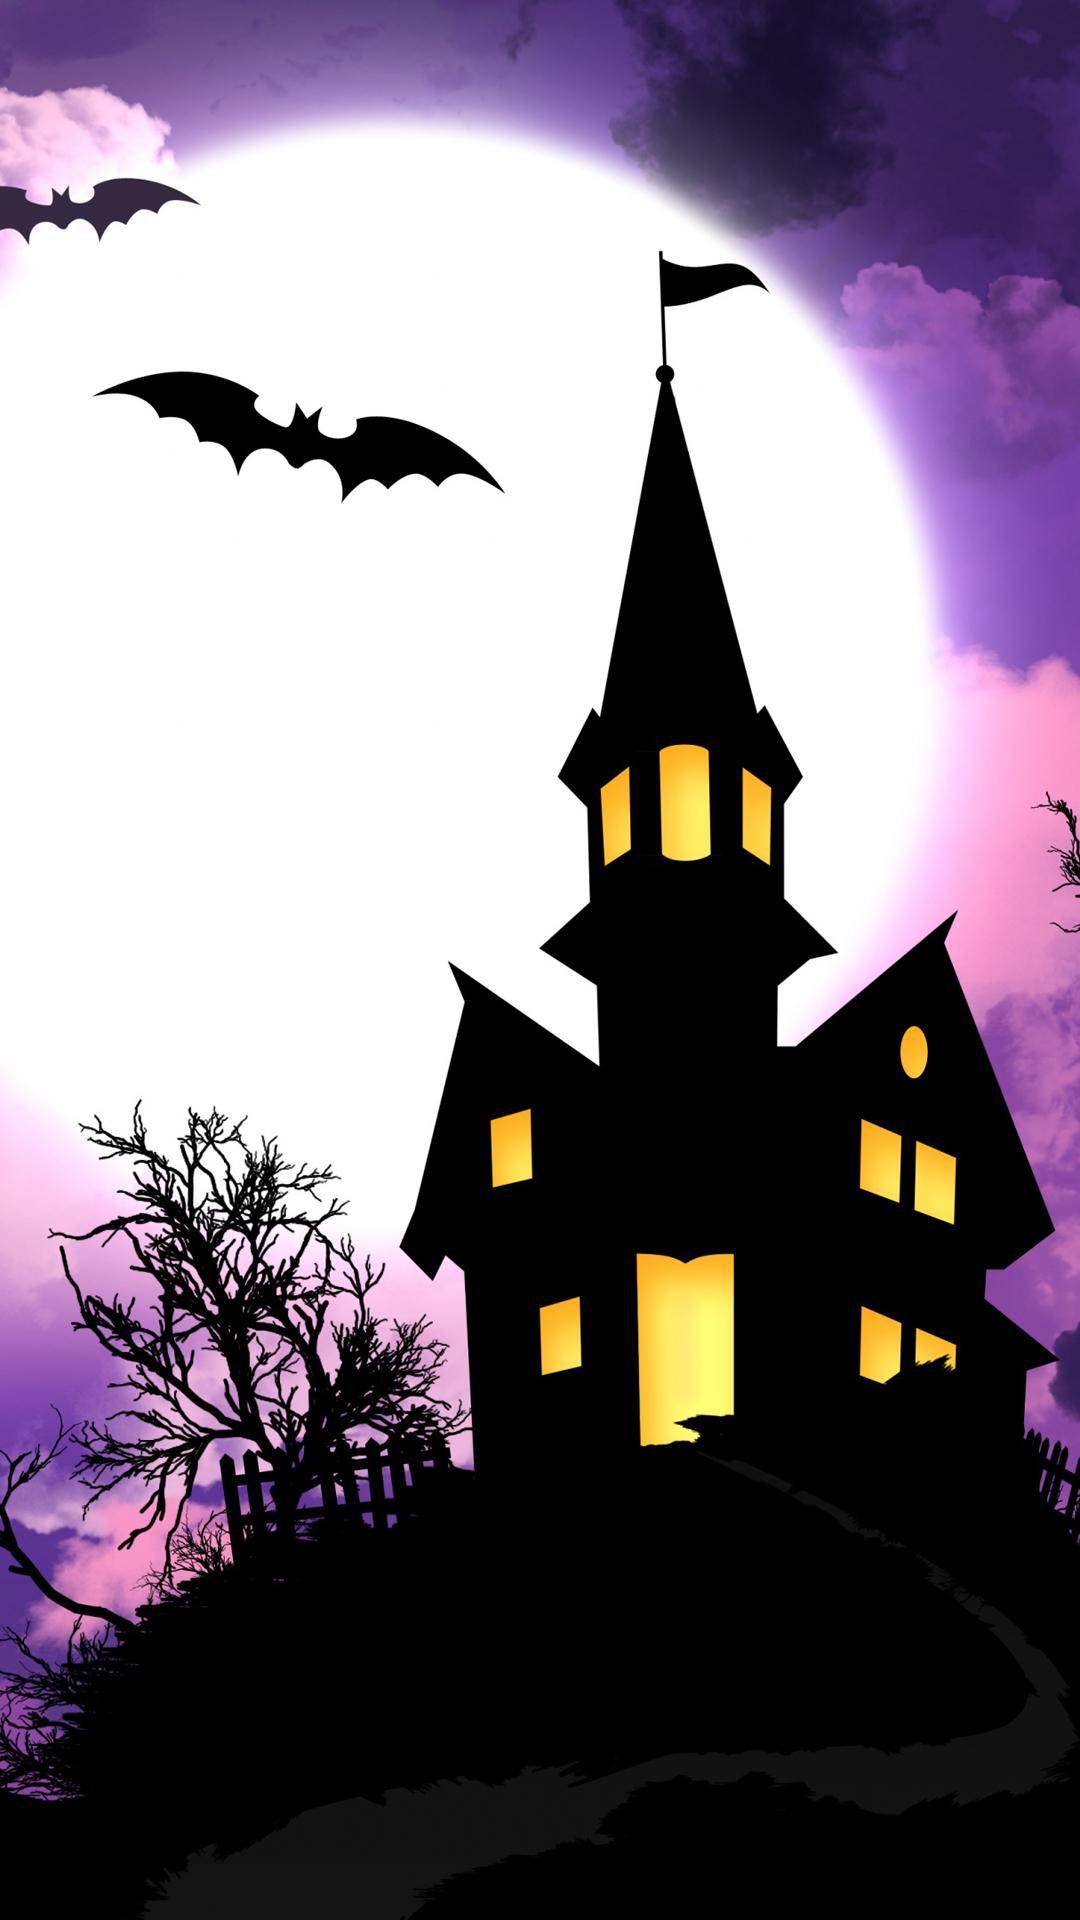 Spooky Halloween House Illustration Android Wallpaper free